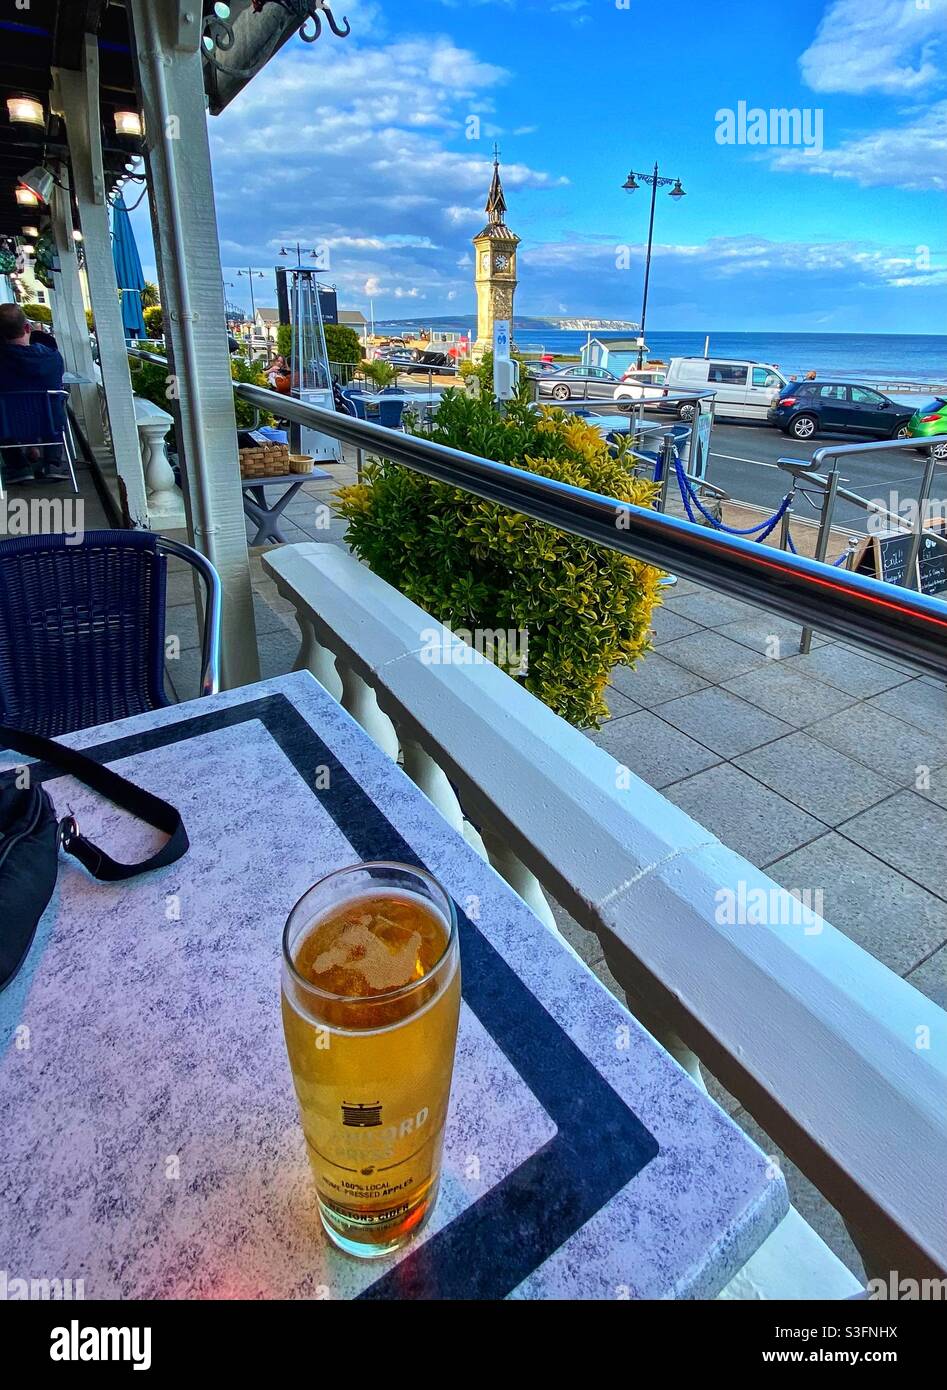 Pint on shanklin seafront Stock Photo